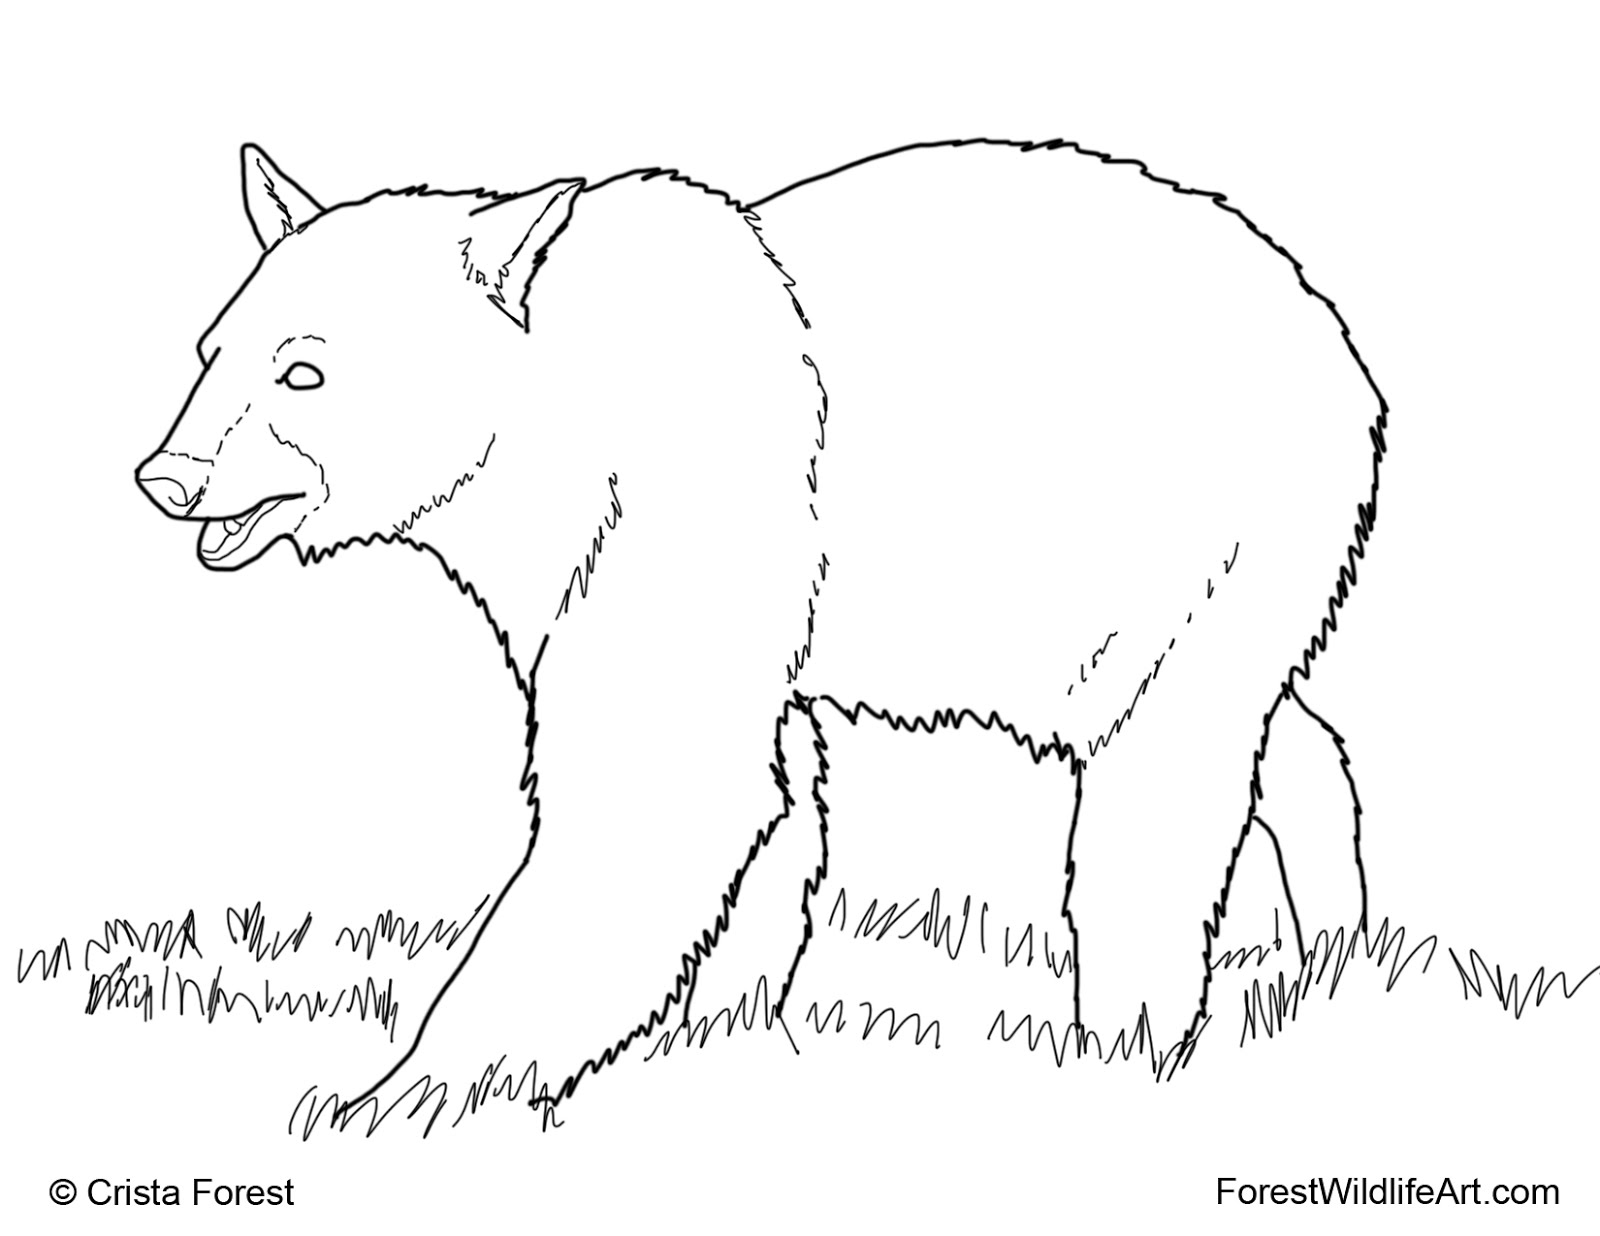 Crista Forest's Animals & Art: Coloring Book Page for Kids - Black Bear